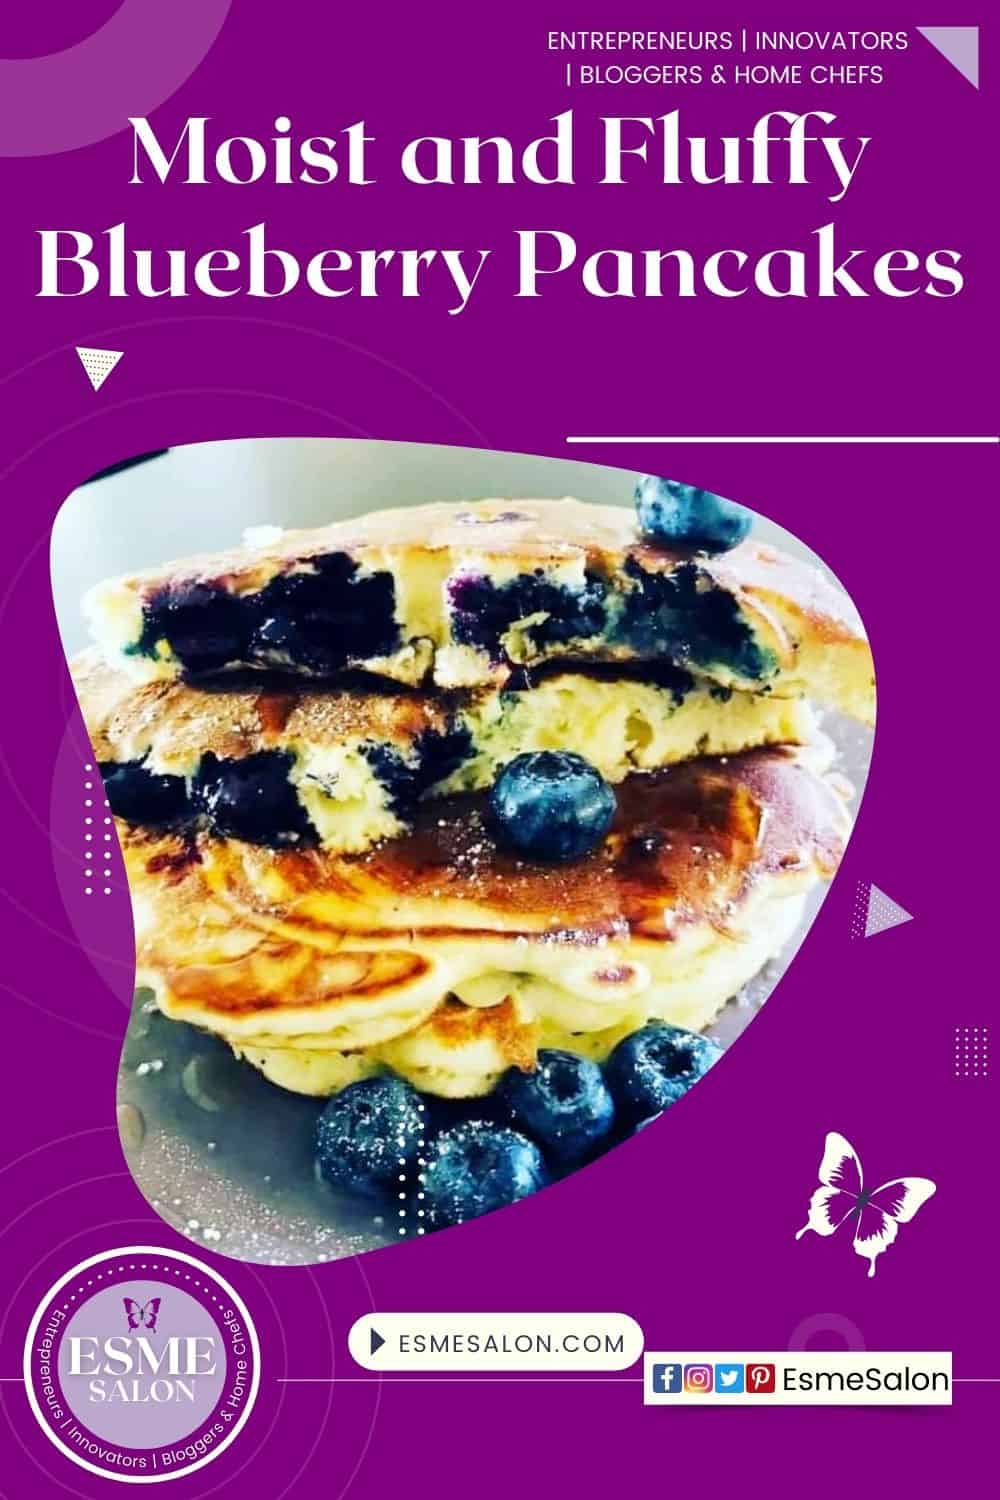 An image of a platter stacked with Blueberry Pancakes and fresh berries on the side